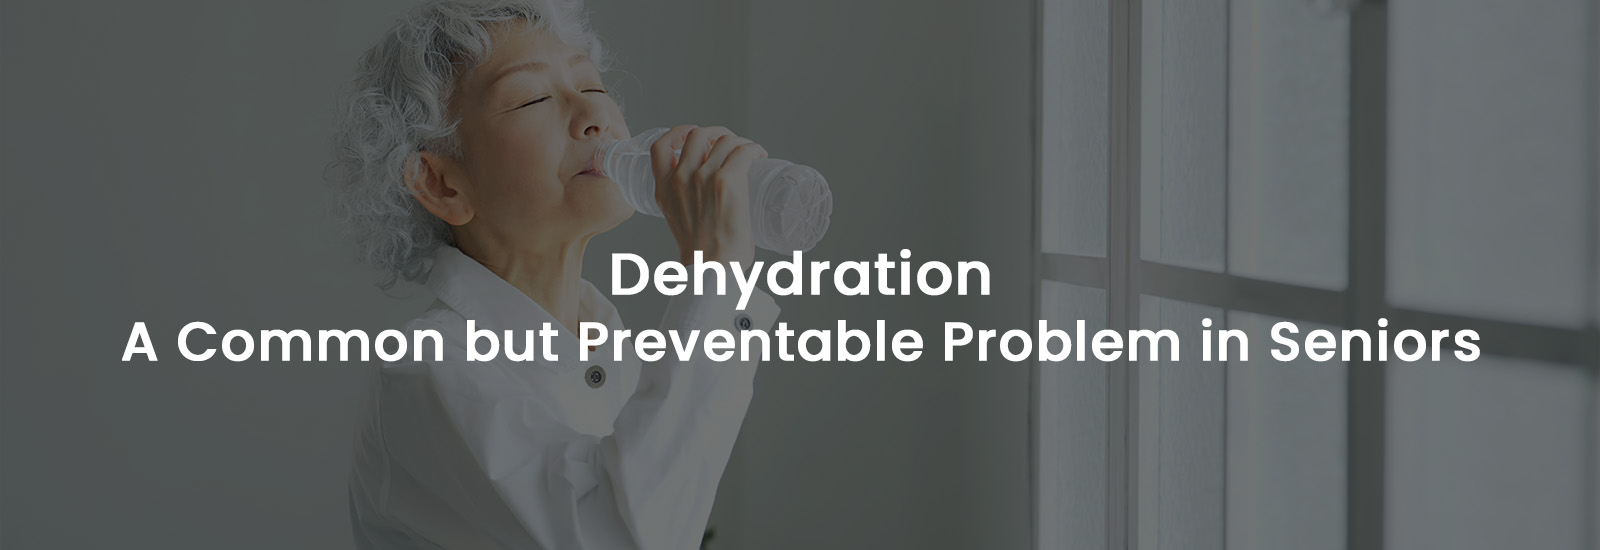 Dehydration – A Common but Preventable Problem in Seniors | Banner Image